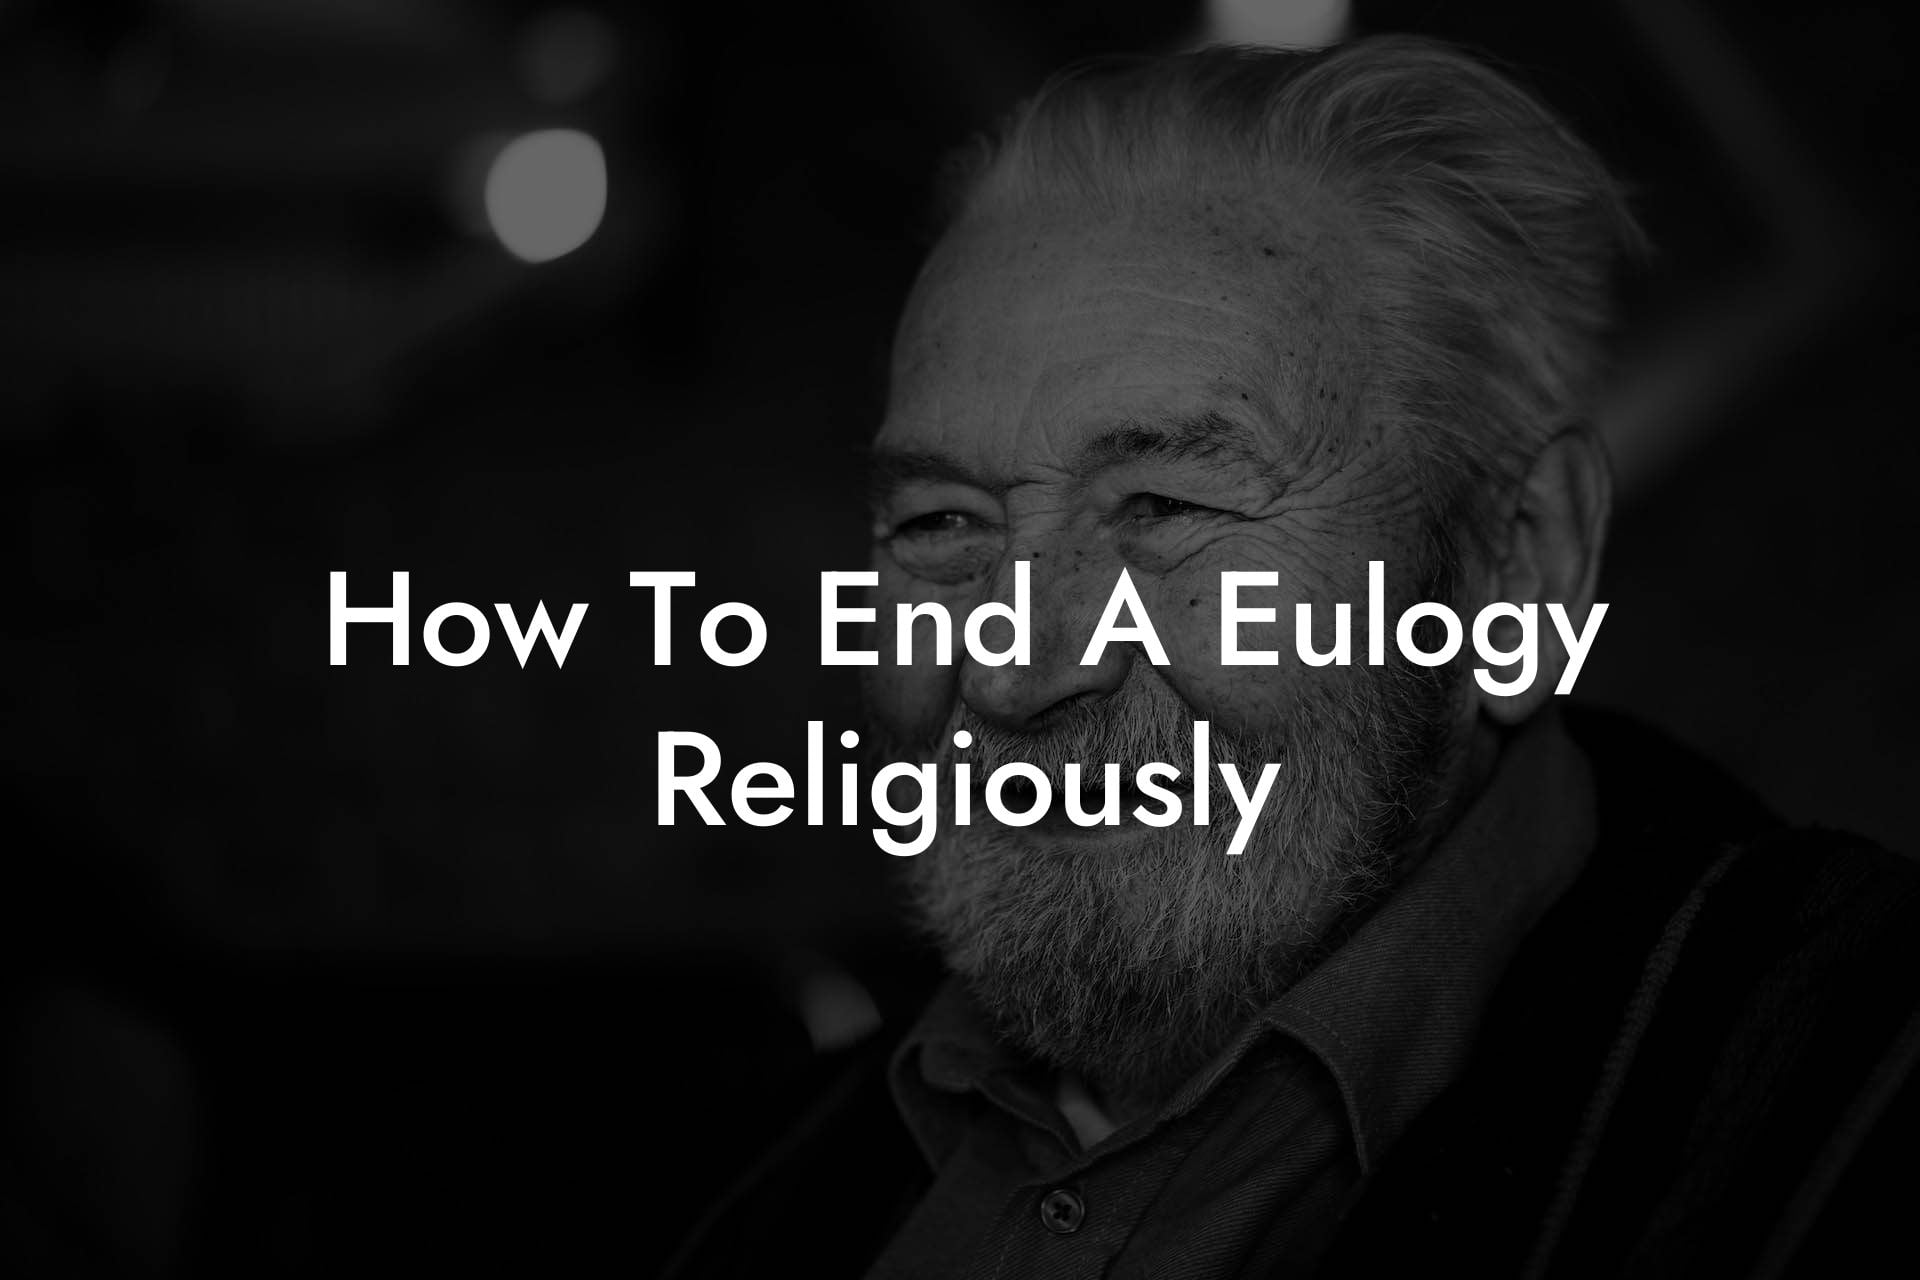 How To End A Eulogy Religiously